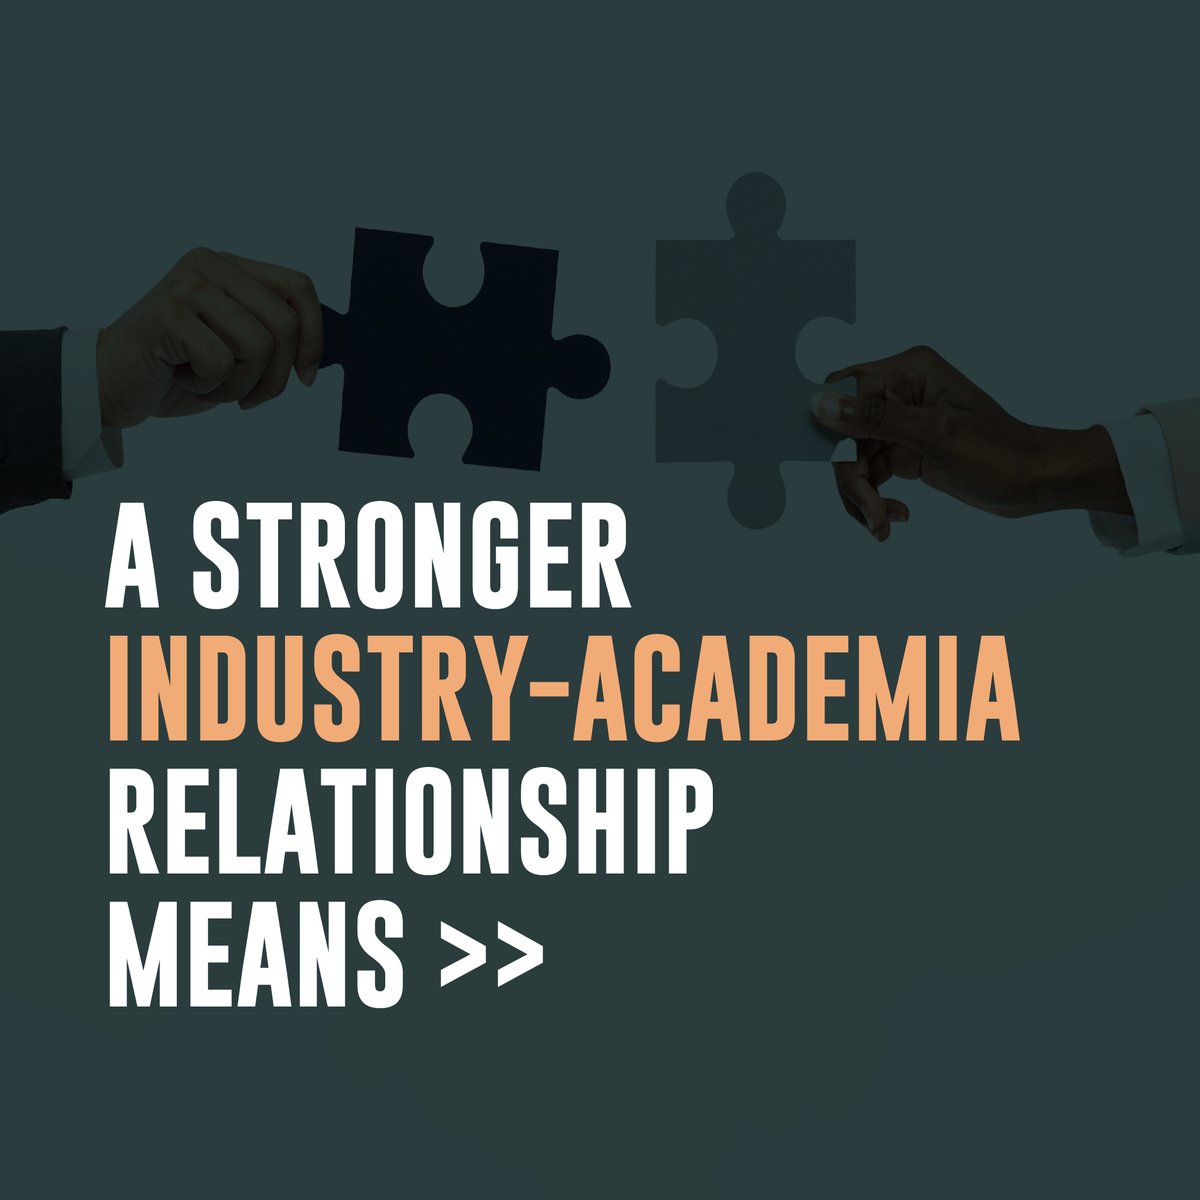 A stronger industry-academia relationship means more innovation, solutions, & a workforce that's future-ready. However, this partnership isn't as strong as it could be. I believe focusing on 3 key areas can improve it. Read more here - bit.ly/3I00Vft